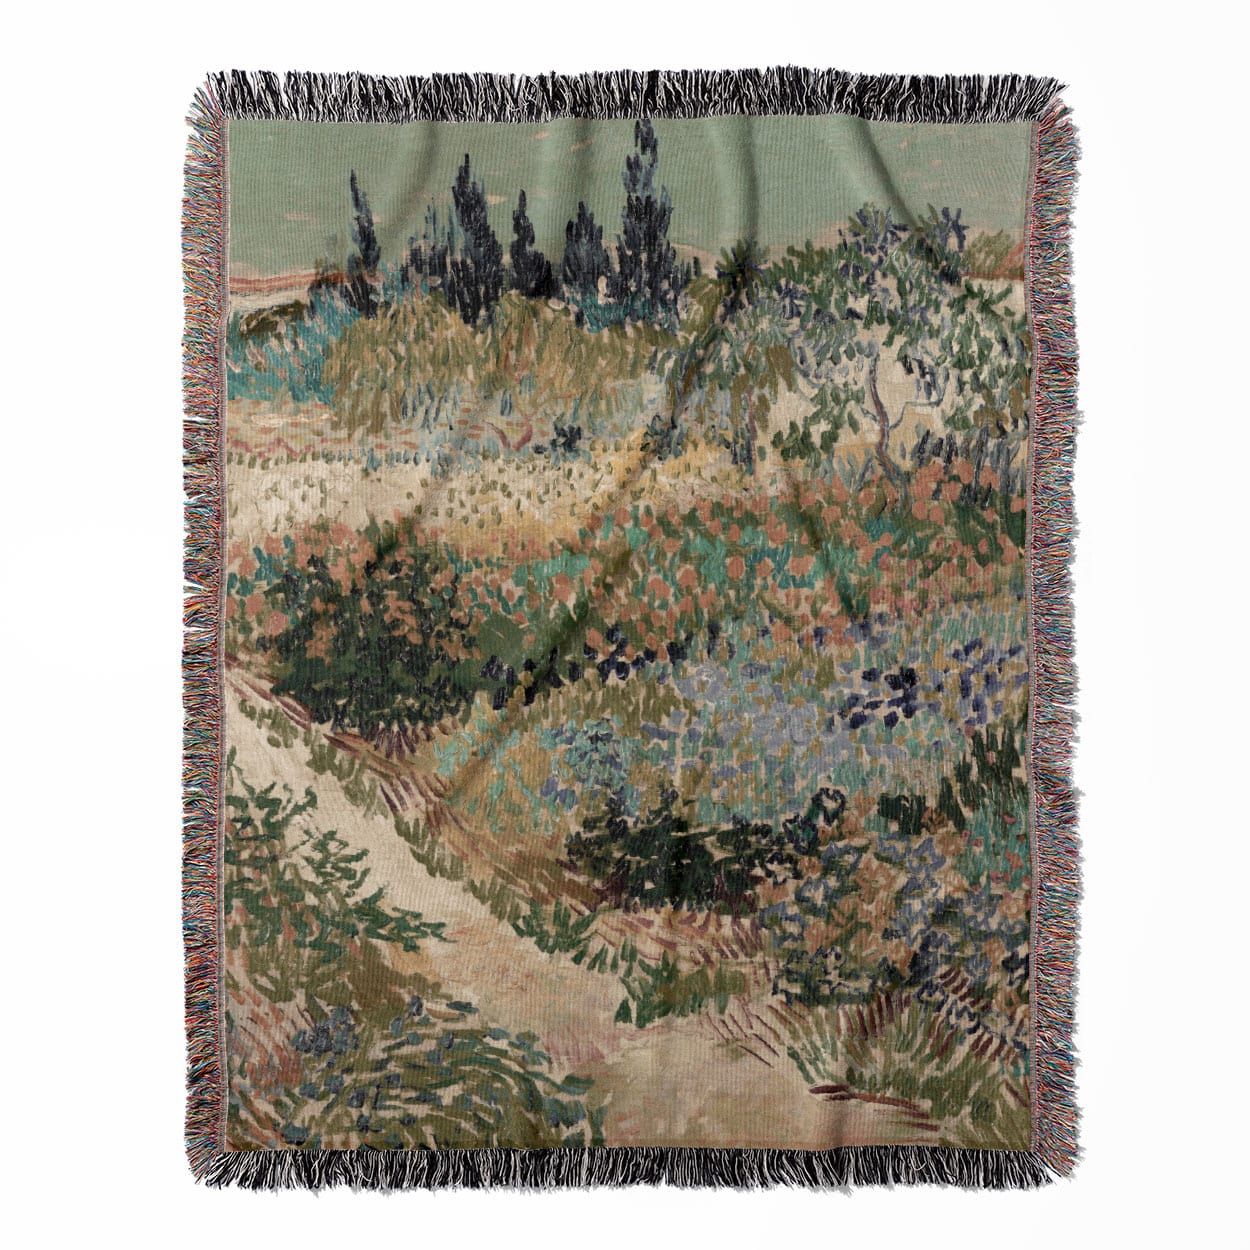 Nature Landscape woven throw blanket, constructed from 100% cotton, providing a soft and cozy texture with a Vincent Van Gogh landscape for home decor.